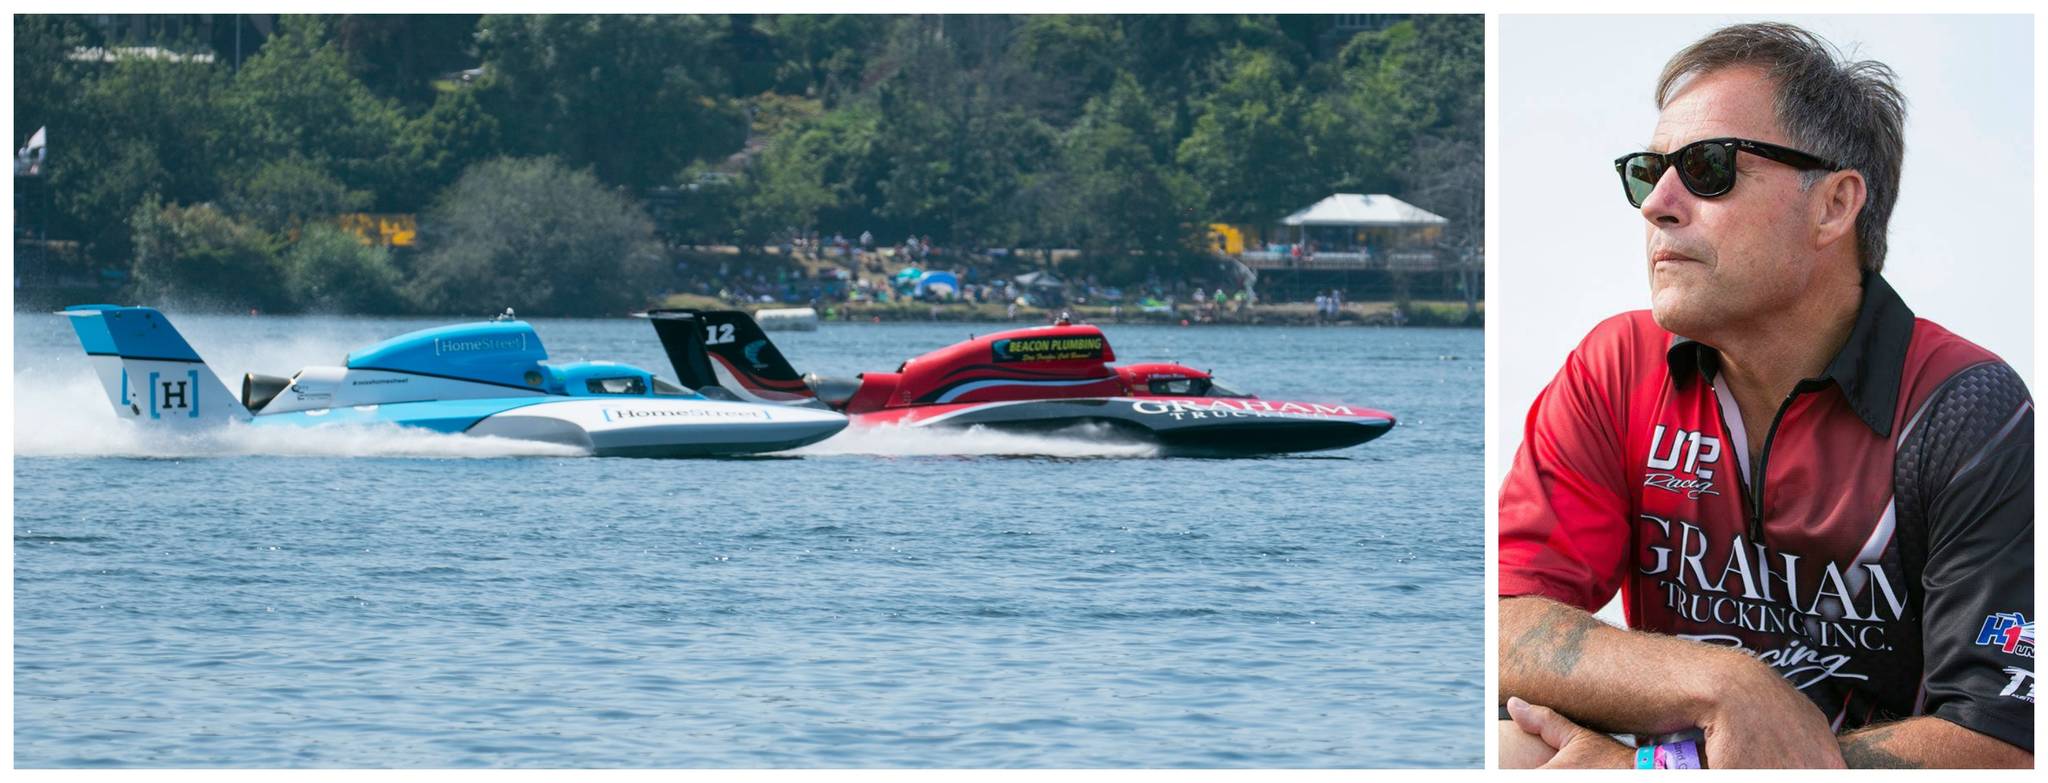 J. Michael Kelly from Bonney Lake drives the U-12 Graham Trucking H1 Unlimited hydroplane (right in race photo) to victory in the HomeStreet Bank Cup at Seafair on Aug. 4. The hydro and team is owned by Mercer Island resident Rob Graham (pictured at far right). Photos courtesy of Owen Blauman and Craig Barney